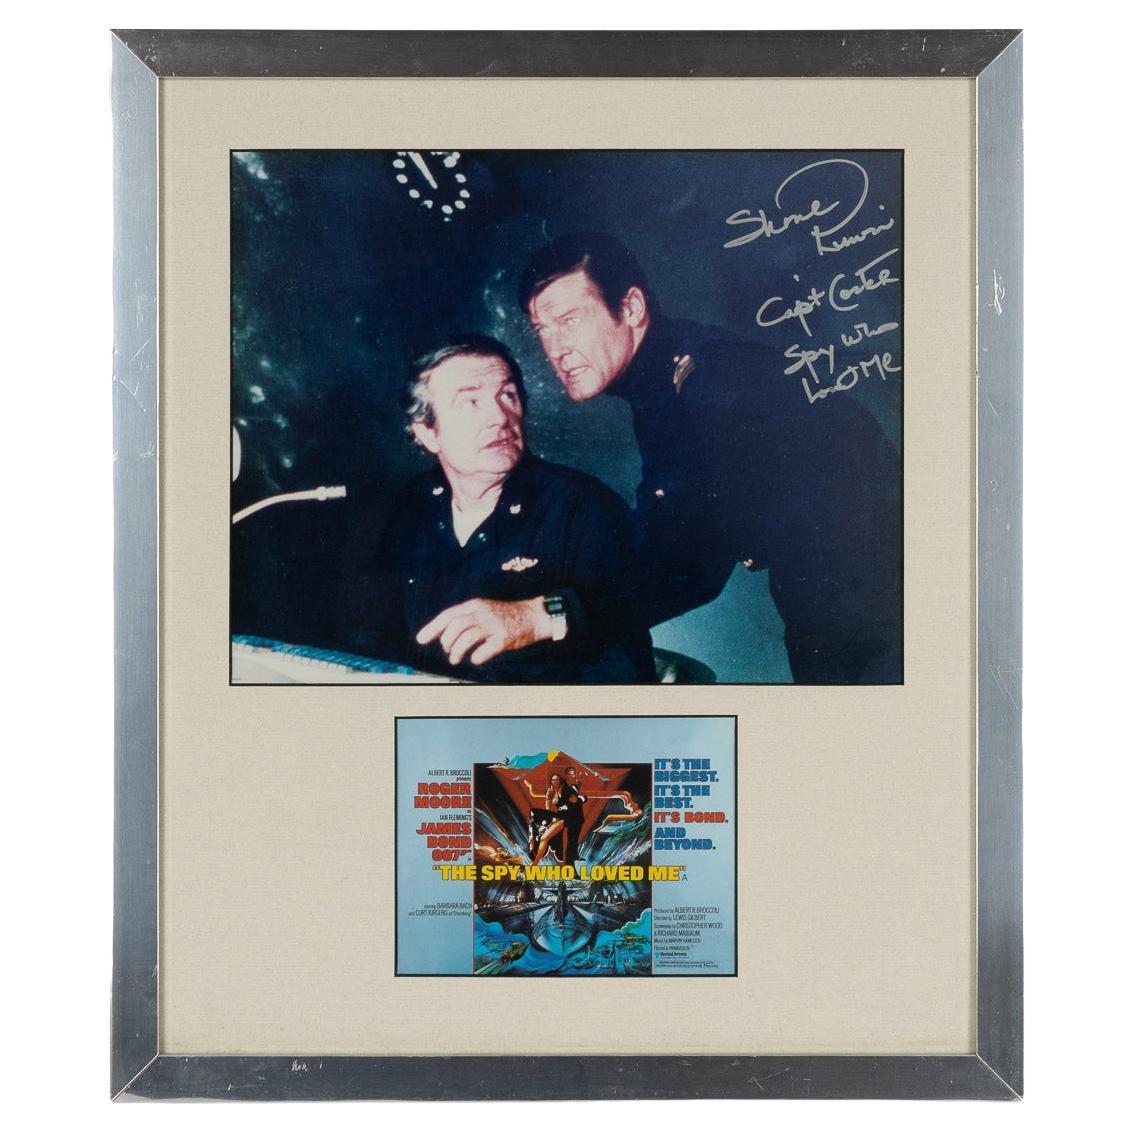 Signed Photograph By Shane Rimmer, Commander Carter "The Spy Who Loved Me"